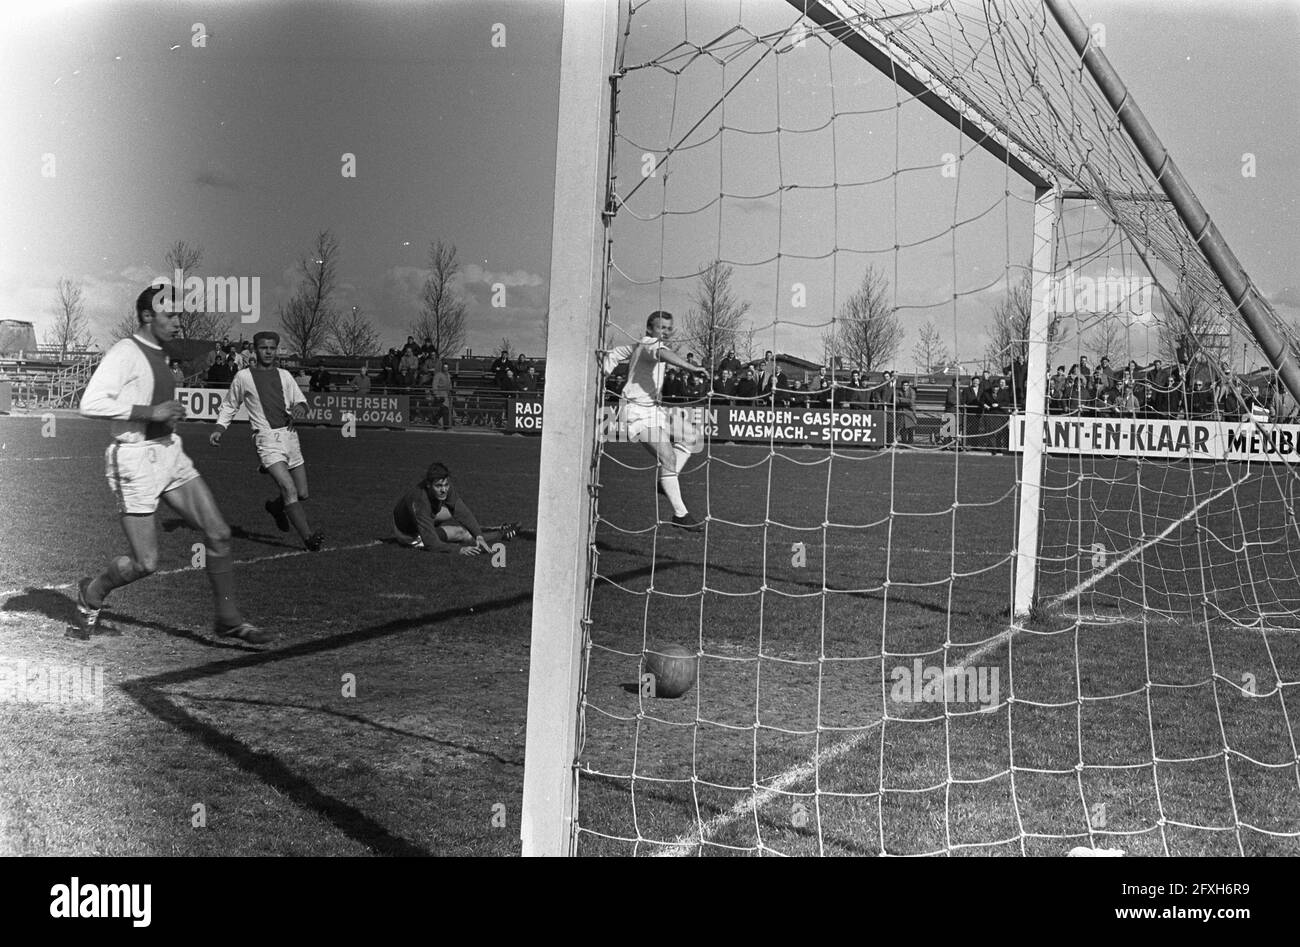 Volewijckers v Eindhoven 1-0, Engelsma (VW) scores, goalkeeper Bax is beaten, April 23, 1967, goalkeepers, sports, soccer, The Netherlands, 20th century press agency photo, news to remember, documentary, historic photography 1945-1990, visual stories, human history of the Twentieth Century, capturing moments in time Stock Photo